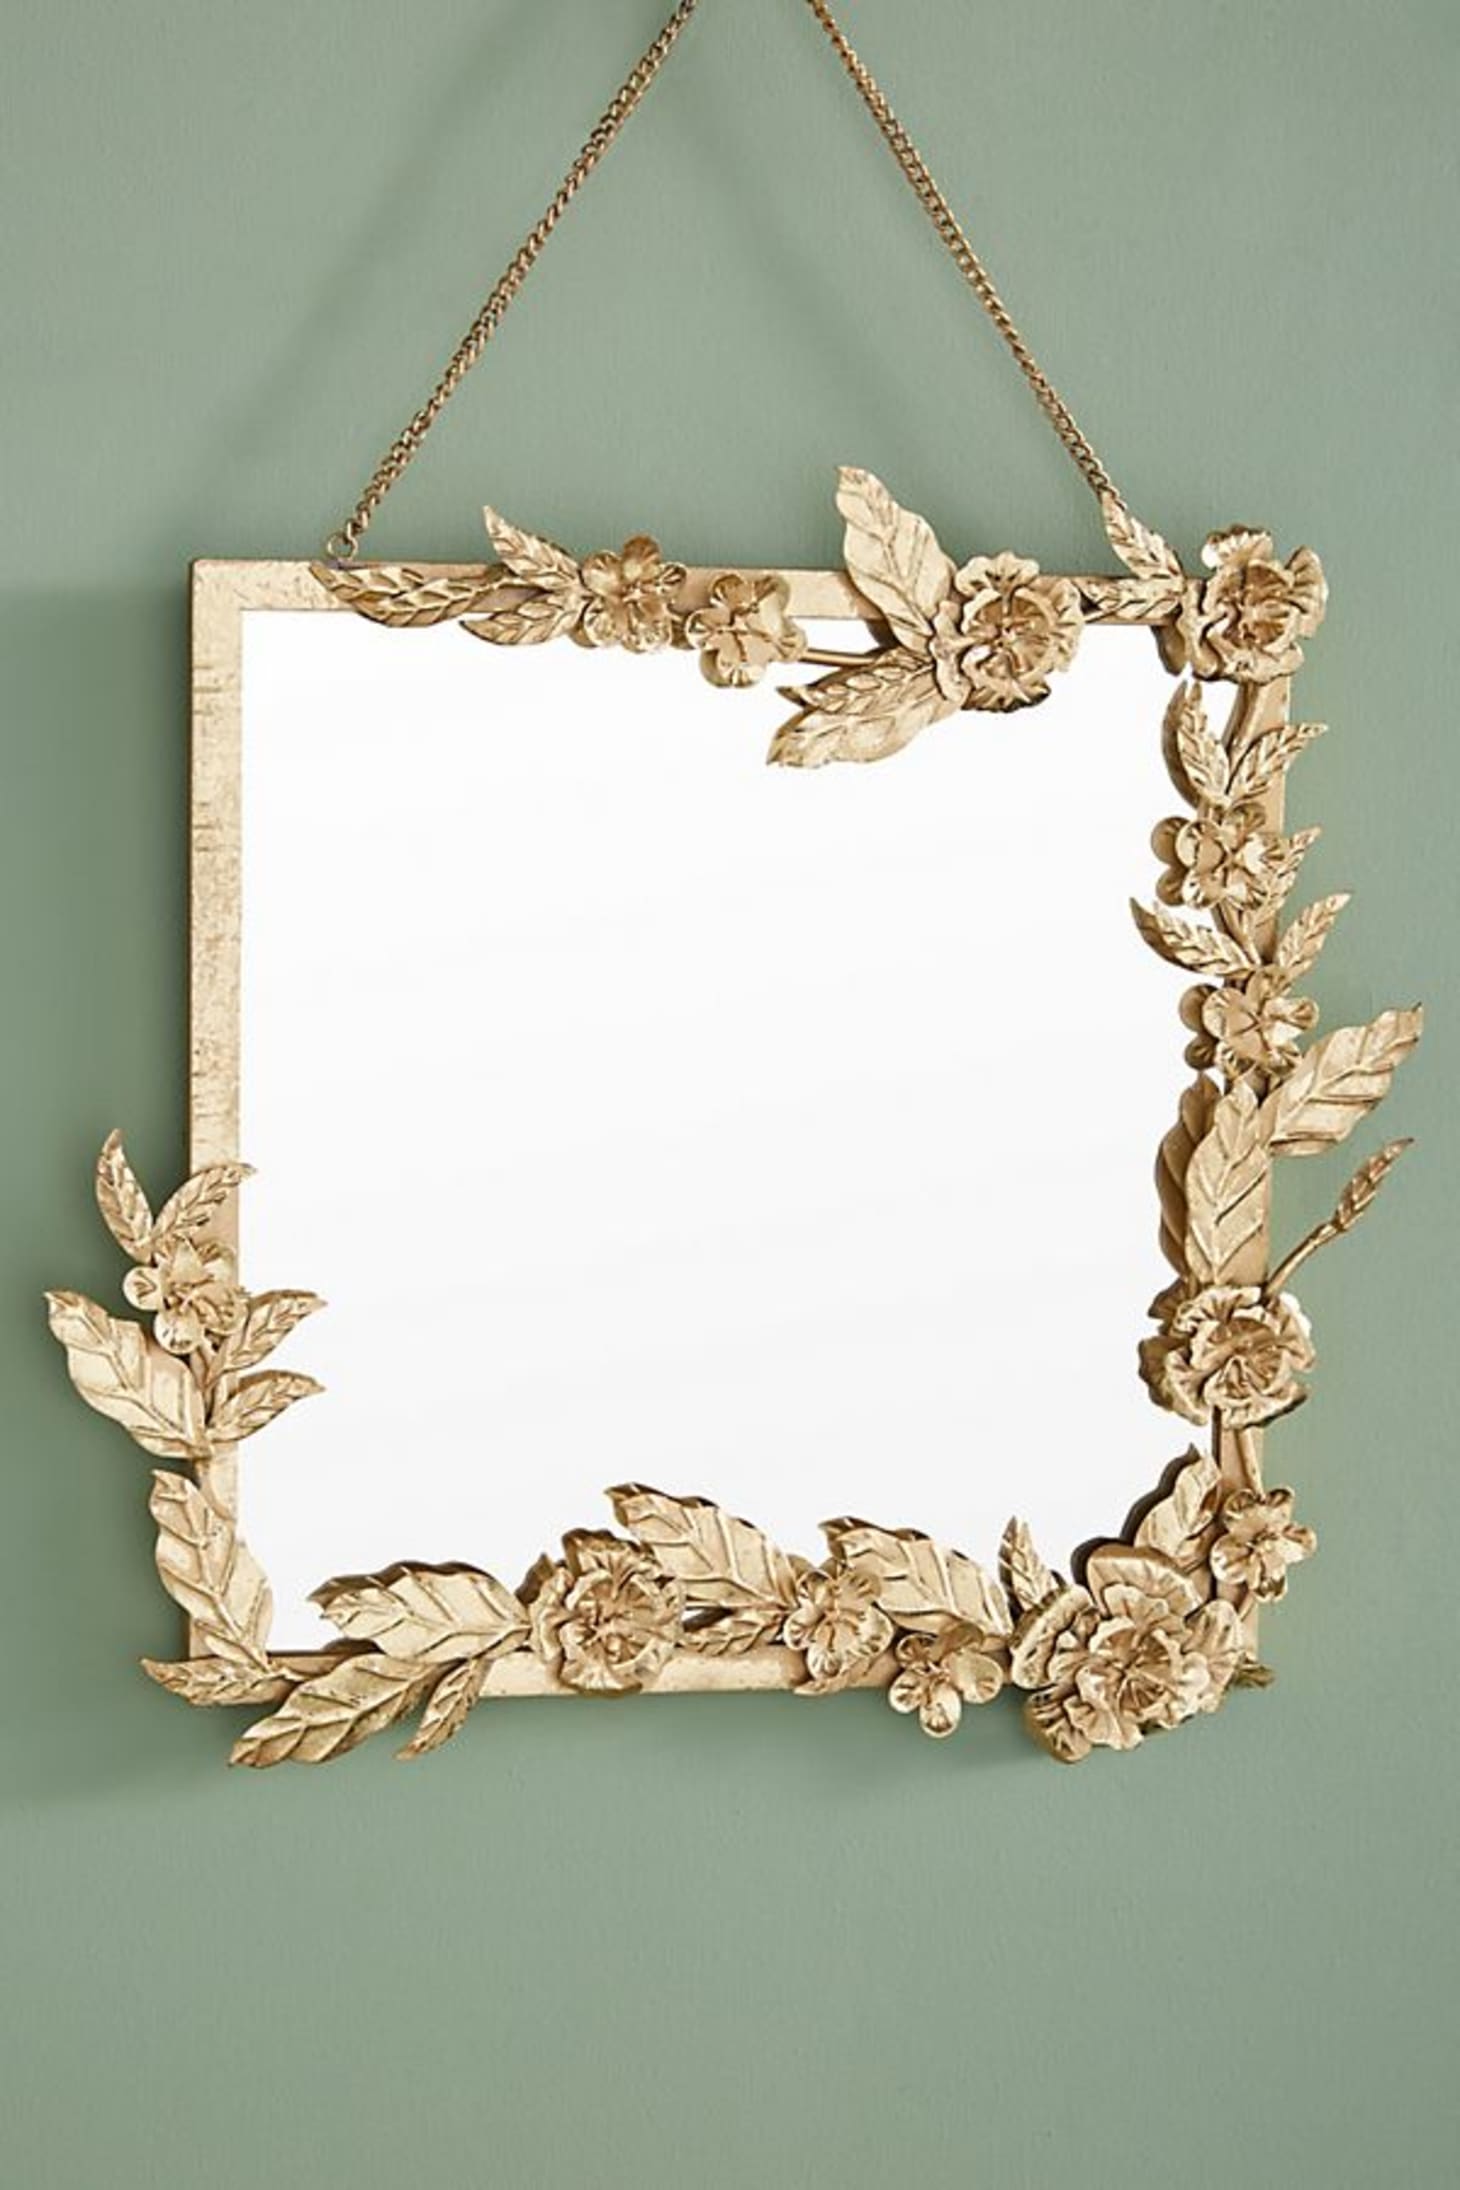 Decorative Mirrors That Double as Wall Art - Stylish Artistic Mirrors ...